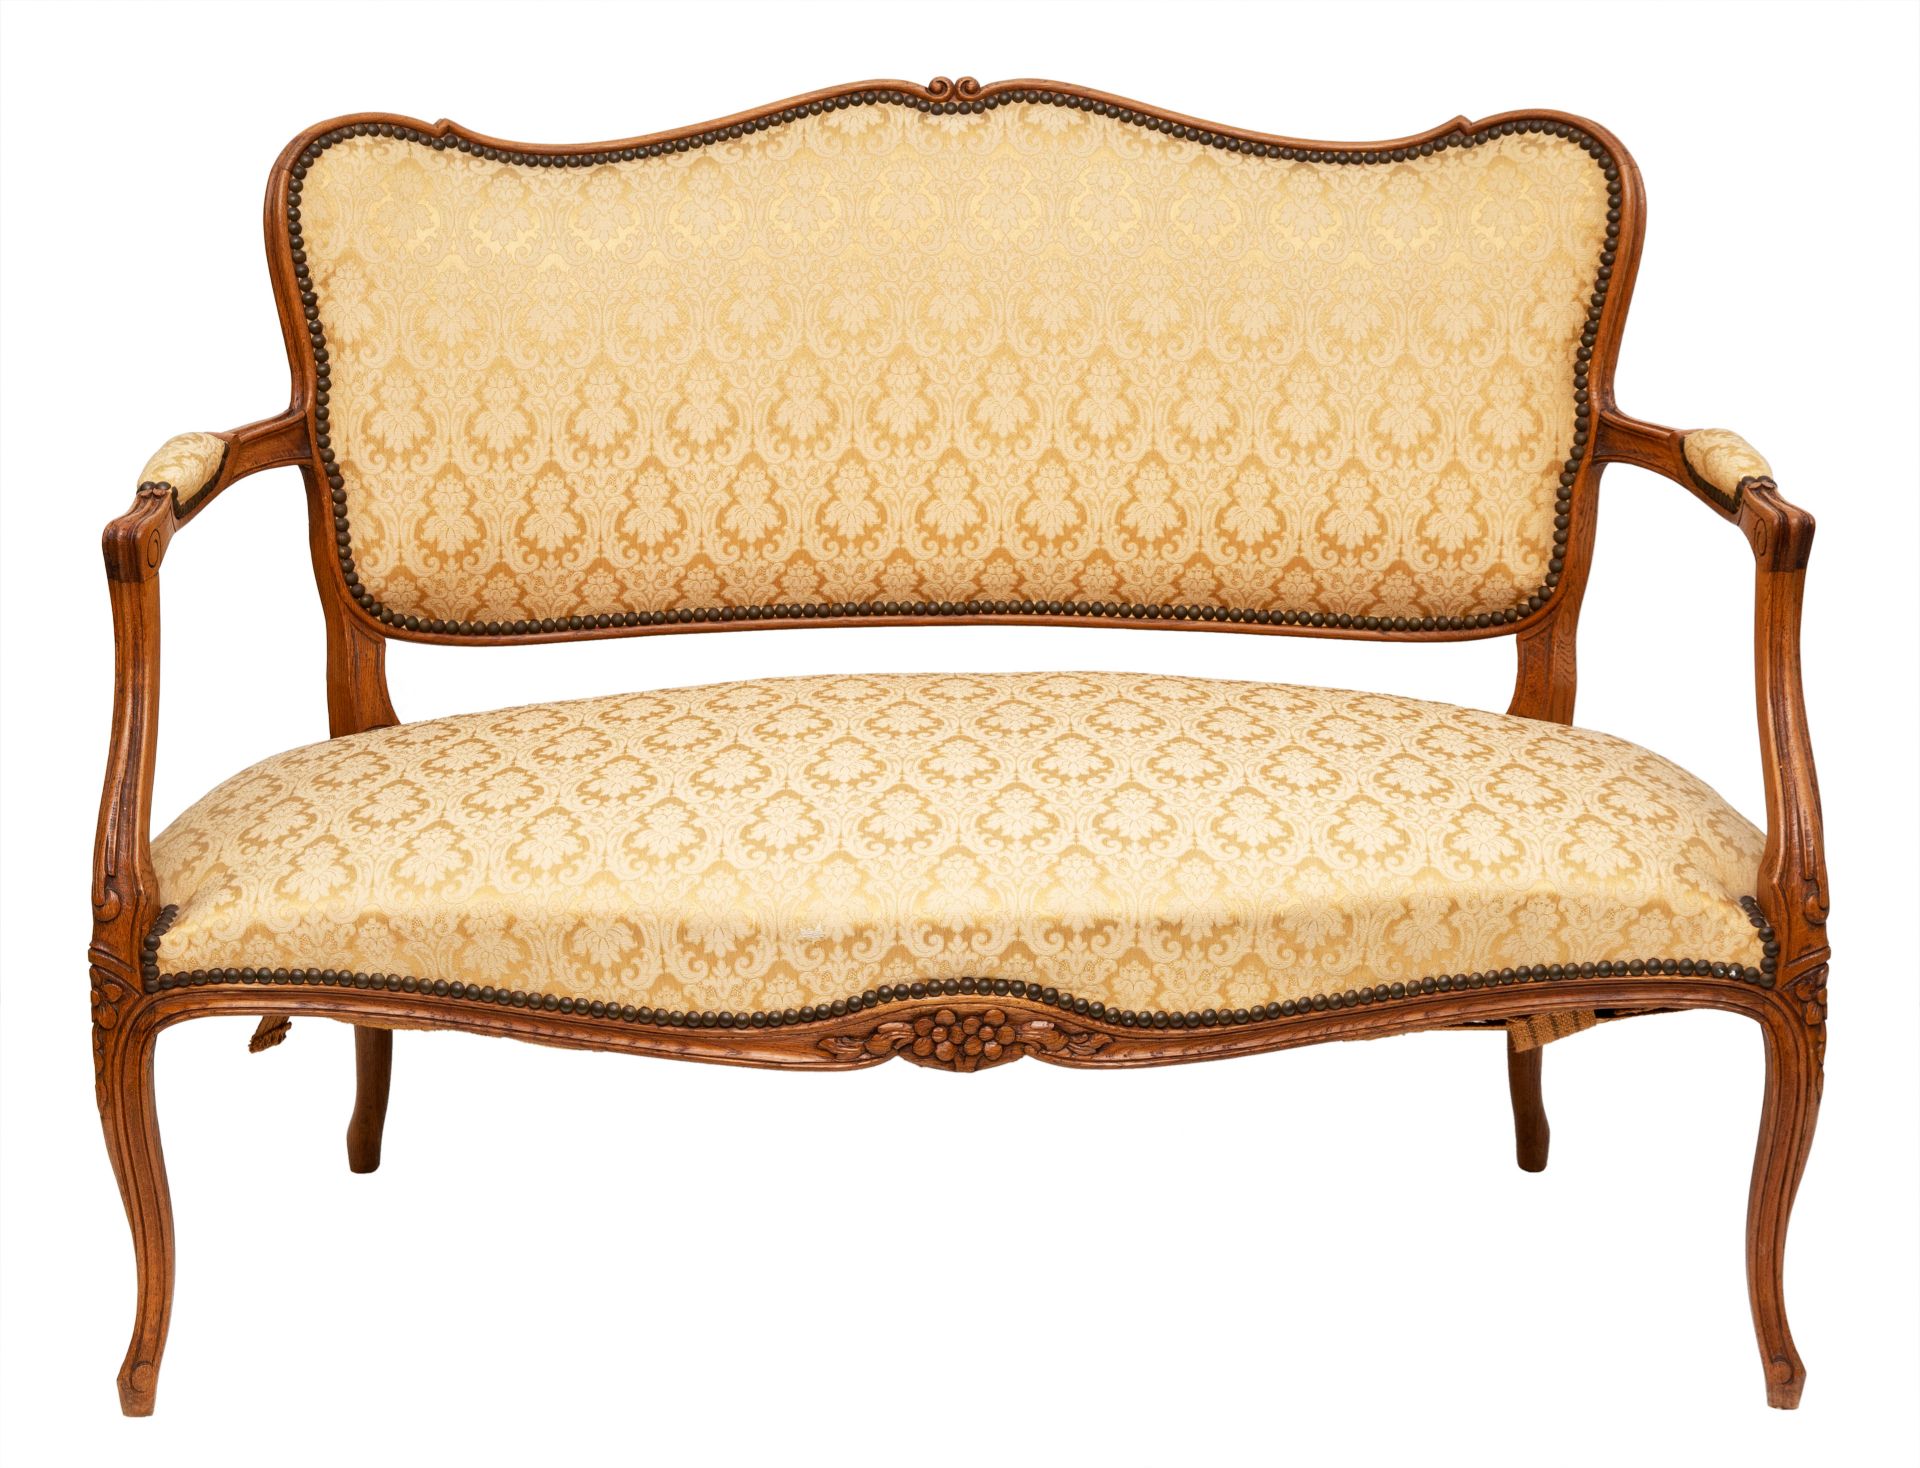 LOUIS XV-STYLE CARVED WALNUT SILK-DAMASK UPHOLSTERED FOUR-PIECE PARLOR SUITE, LATE 19TH CENTURY - Bild 3 aus 3